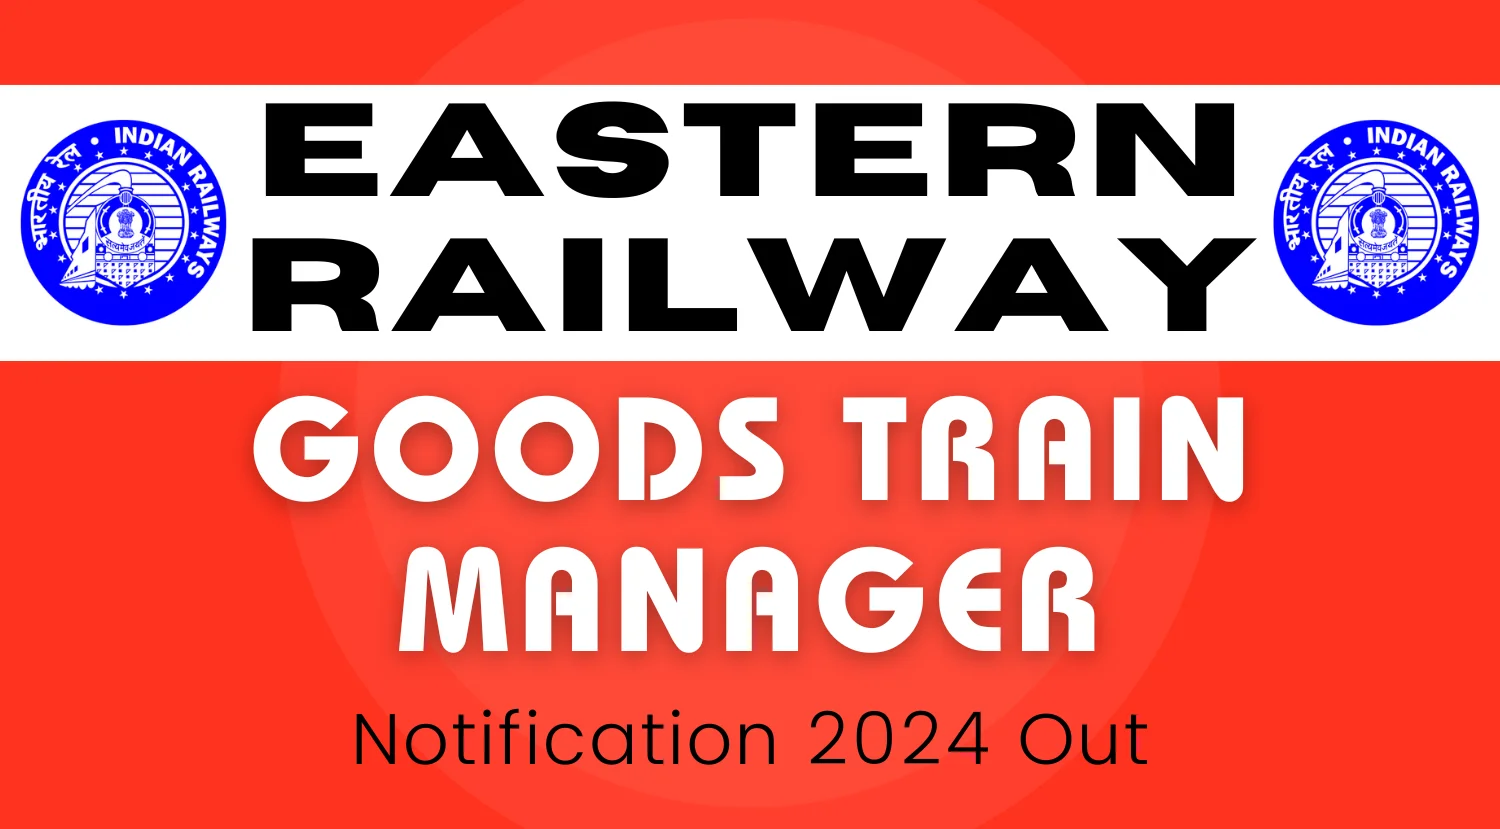 Eastern Railway Recruitment 2024 Notification Out for 108 Goods Train Manager Posts